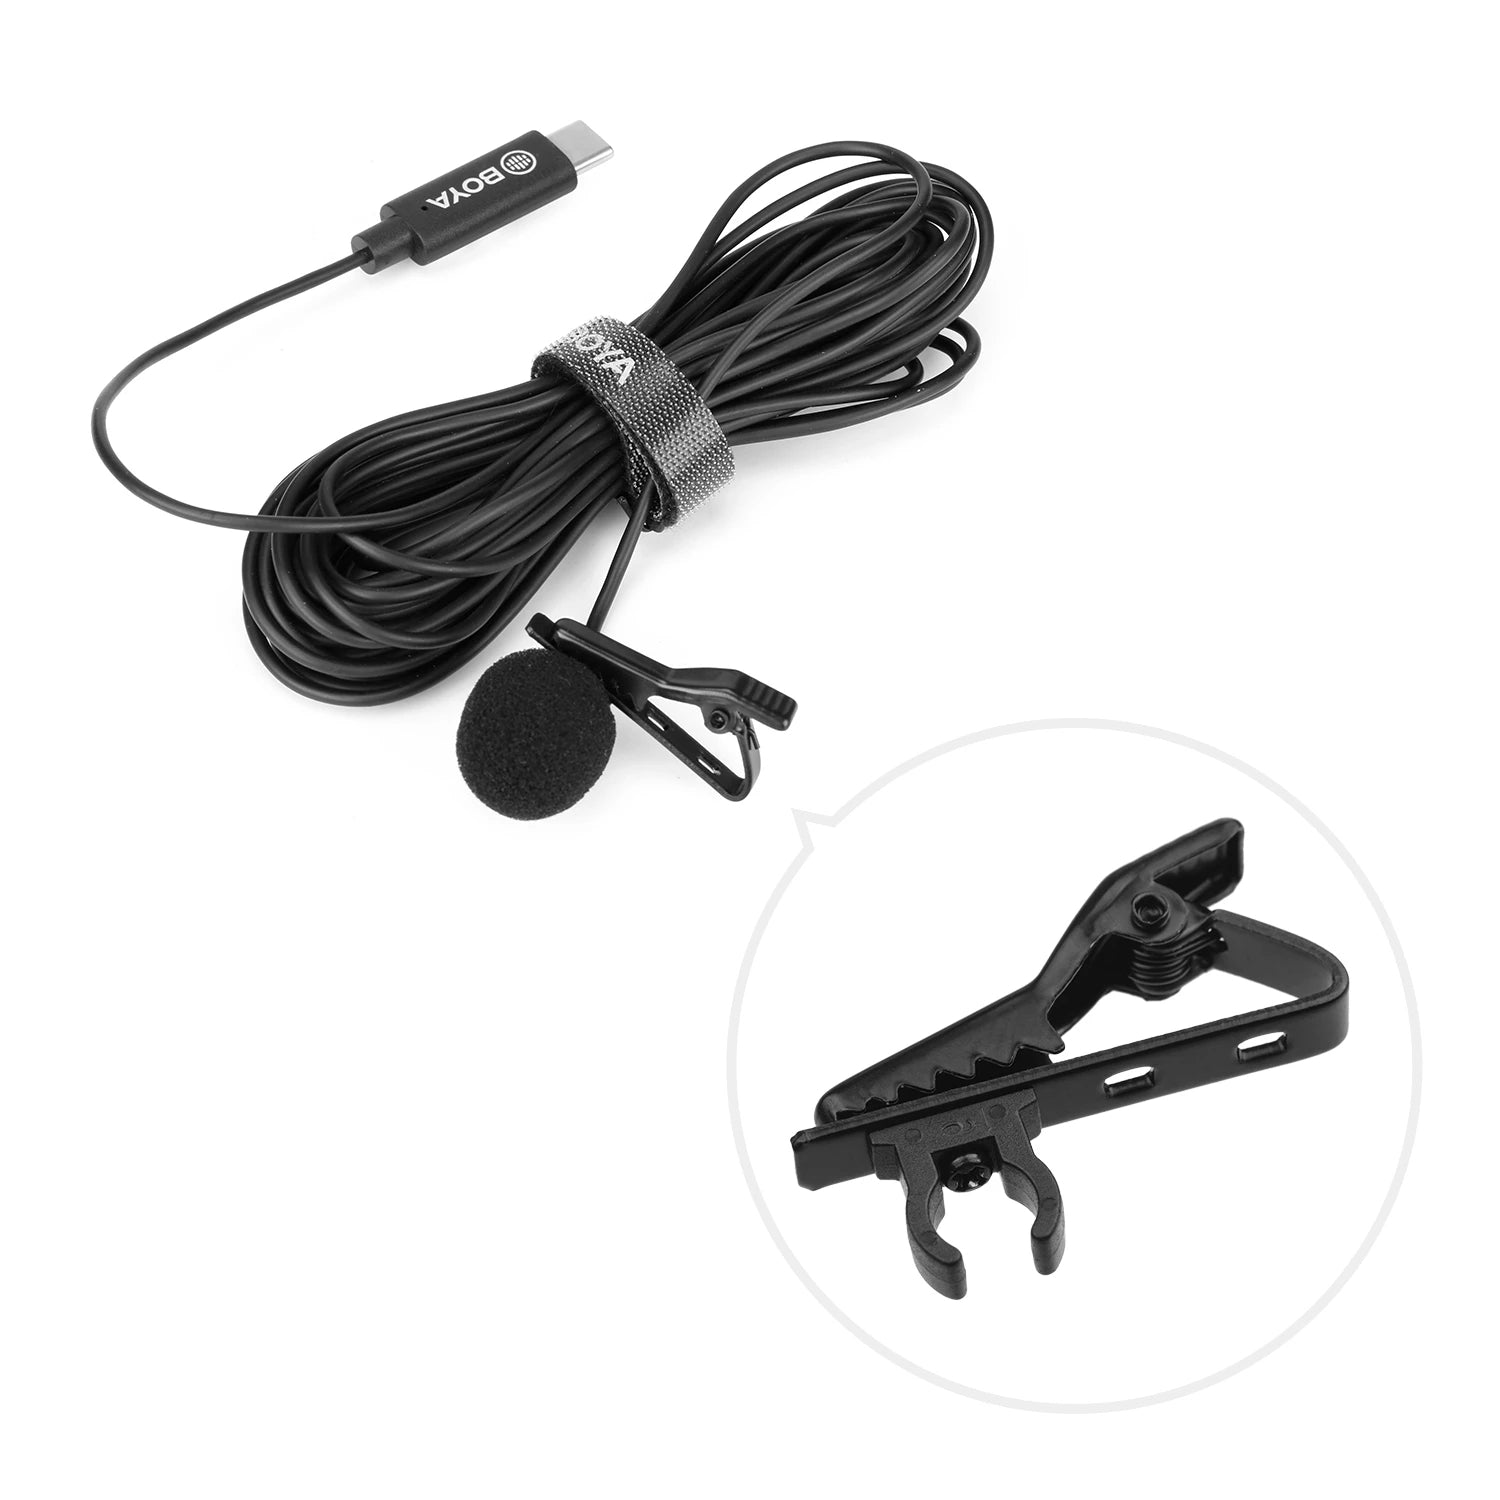 BOYA BY-M3 Lavalier Lapel Microphone Mini Mic Omnidirectional Single Head 6 Meters Cable for USB Type-C Devise Android Smartphone for iPad Pro,for Mac Computer